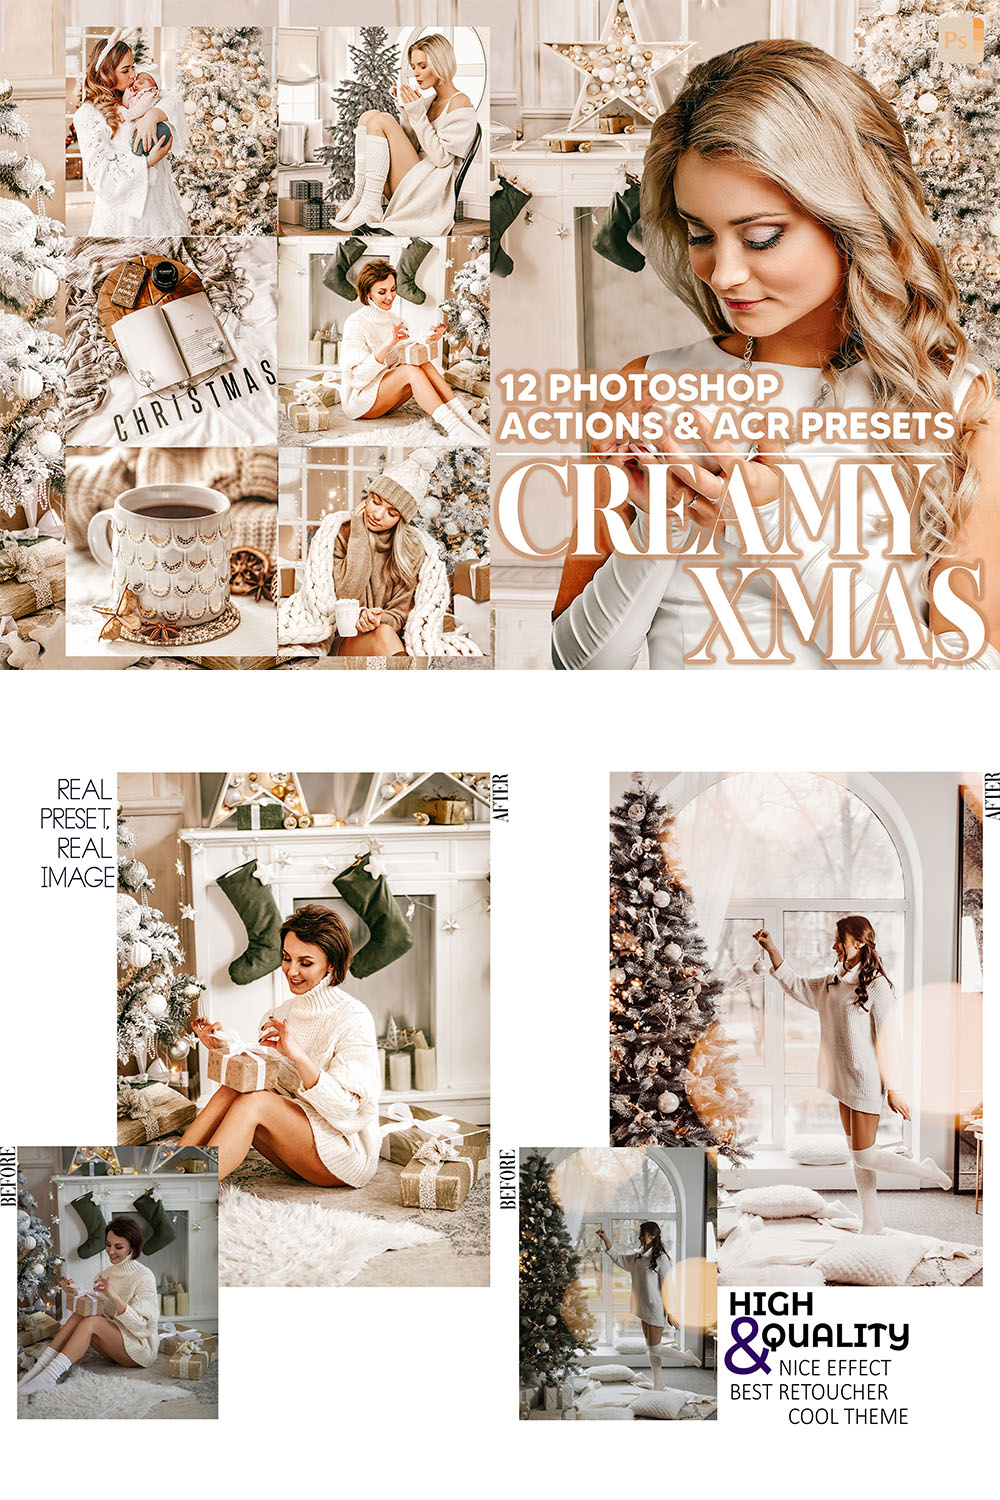 12 Photoshop Actions, Creamy Xmas Ps Action, Christmas ACR Preset, Winter Ps Filter, Atn Portrait And Lifestyle Theme Instagram, Blogger pinterest preview image.